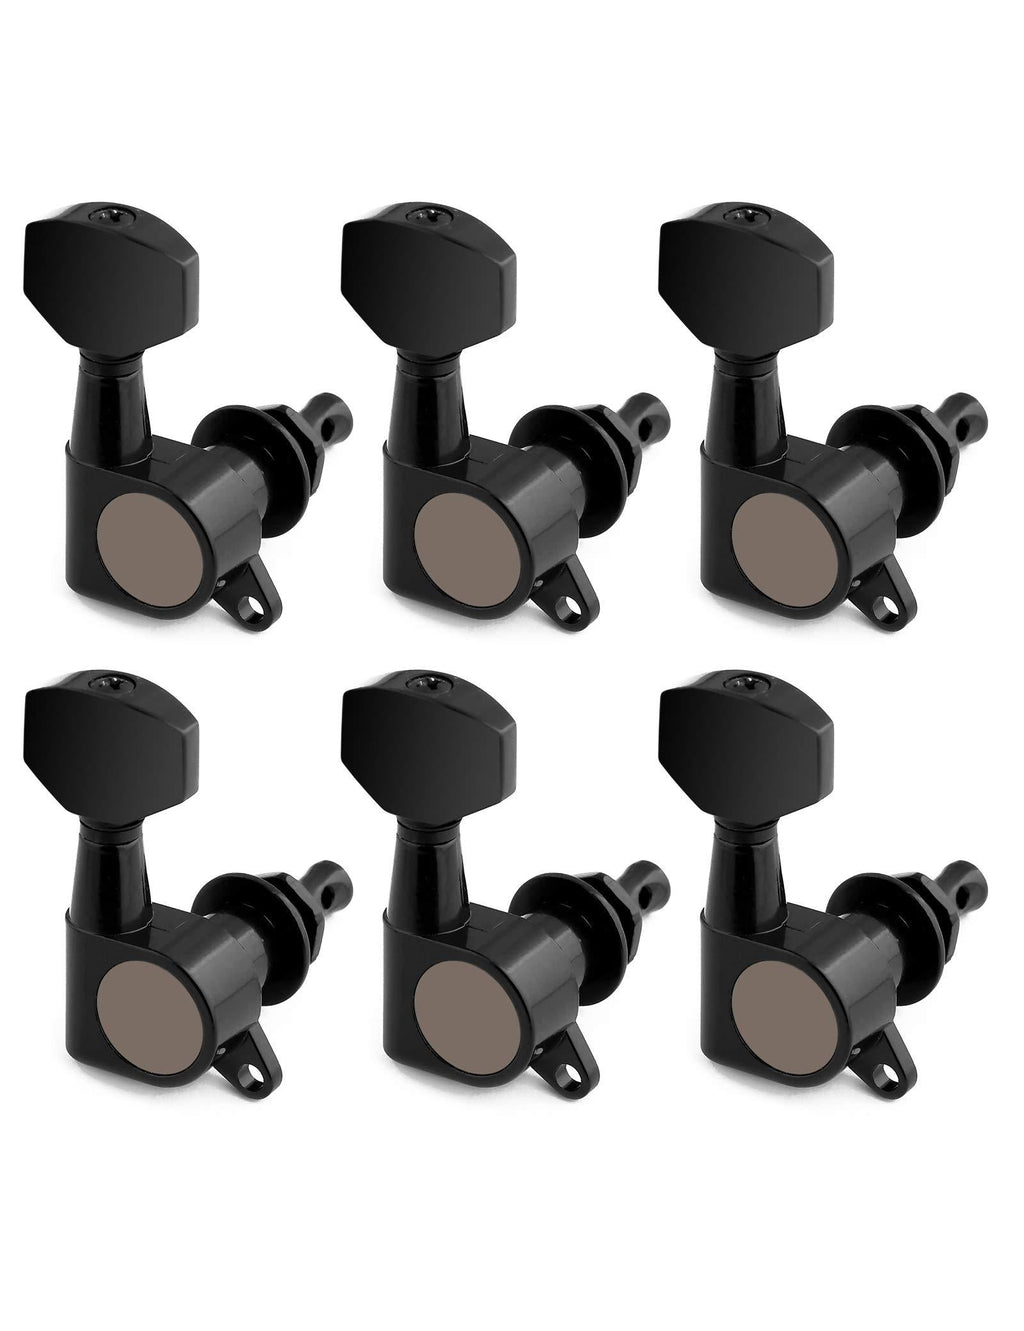 Holmer Sealed String Tuning Pegs Tuning Machines Grover Machine Heads Tuners Tuning Keys 6 In Line for Right Handed Acoustic Guitar or Electric Guitar Black.